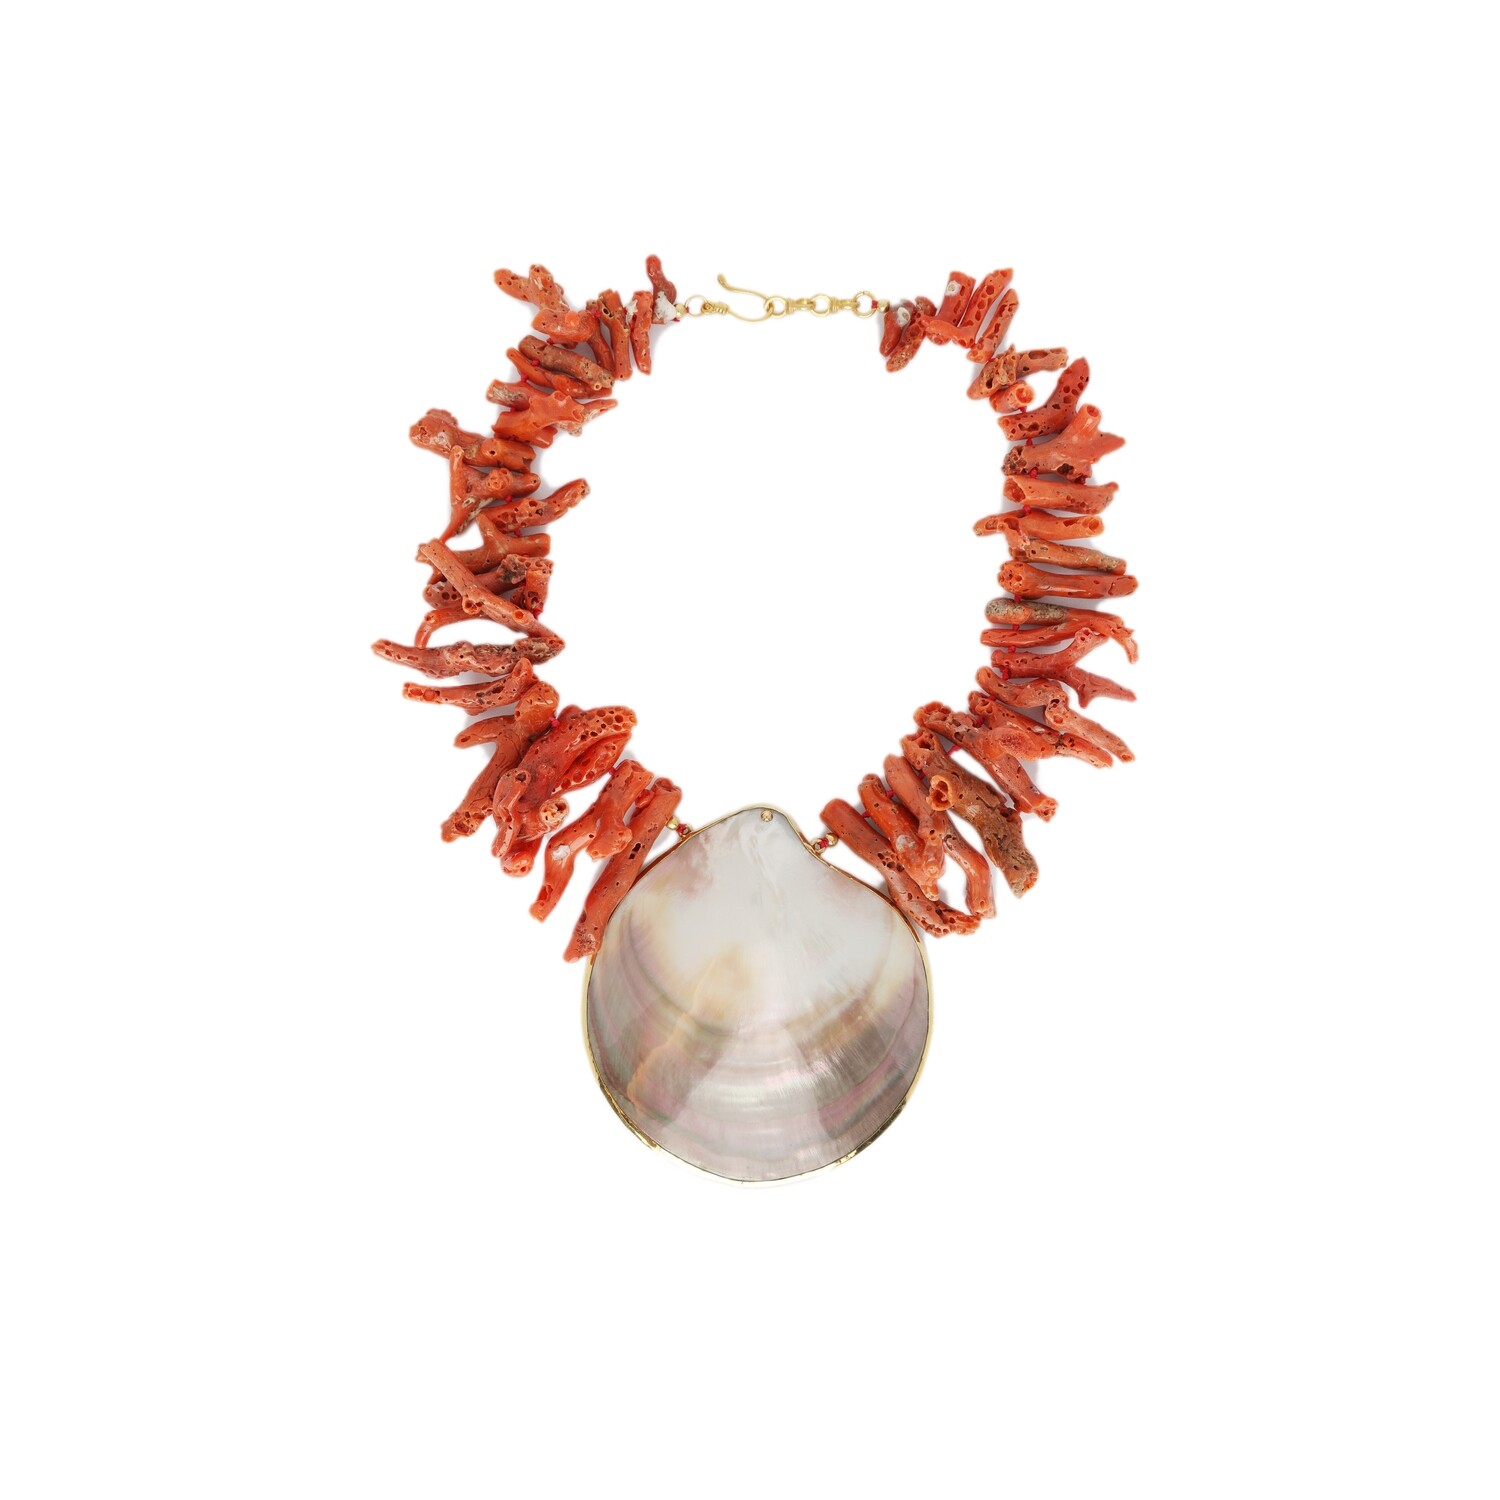 CAPRI in Coral branches and Mother of Pearls